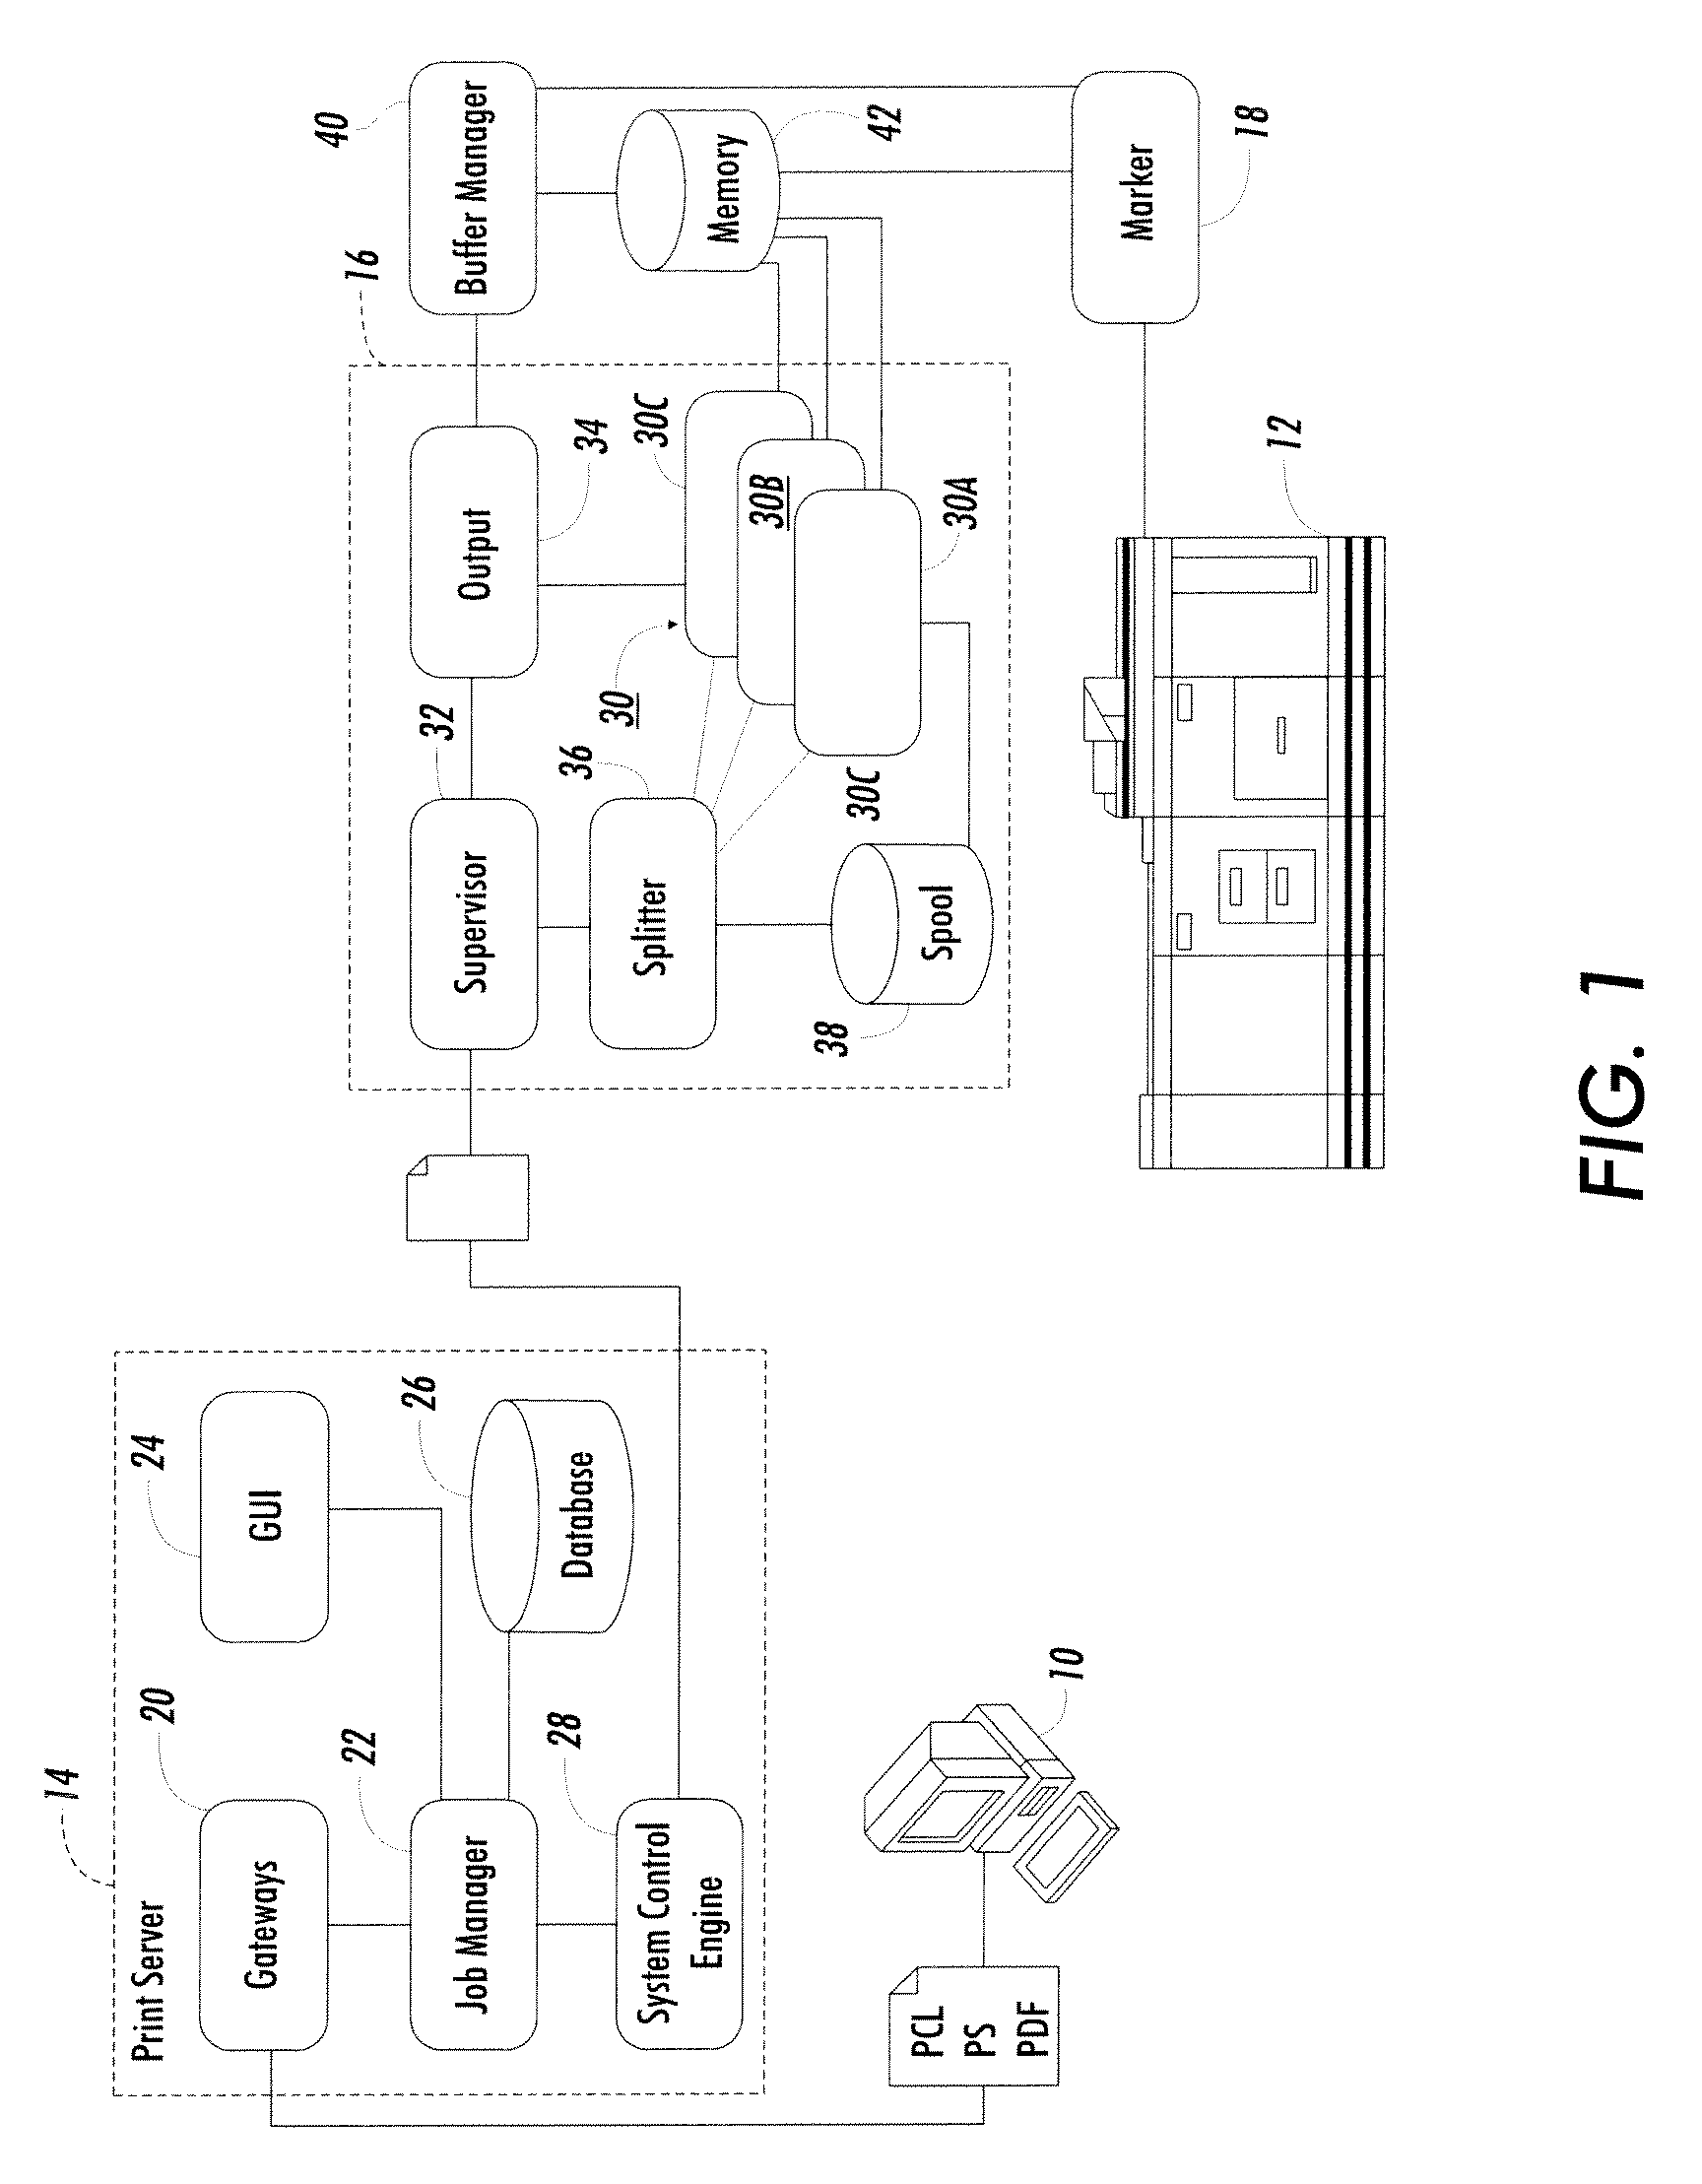 Parallel printing system having flow control in a virtual disk transfer system